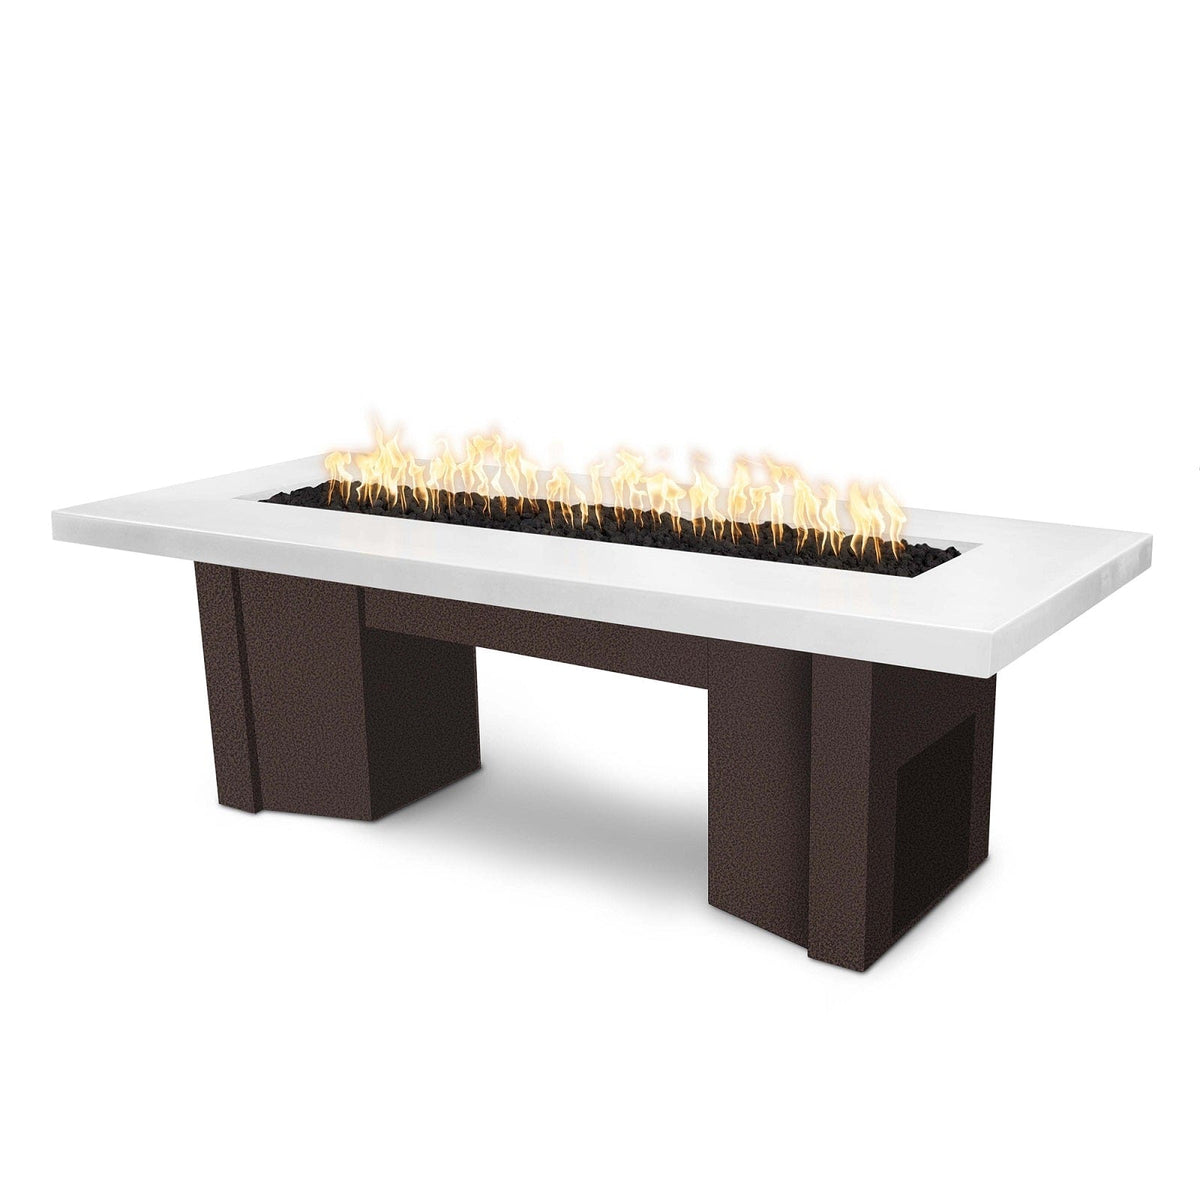 The Outdoor Plus Fire Features Limestone (-LIM) / Copper Vein Powder Coated Steel (-CPV) The Outdoor Plus 60&quot; Alameda Fire Table Smooth Concrete in Liquid Propane - Match Lit / OPT-ALMGFRC60-LP